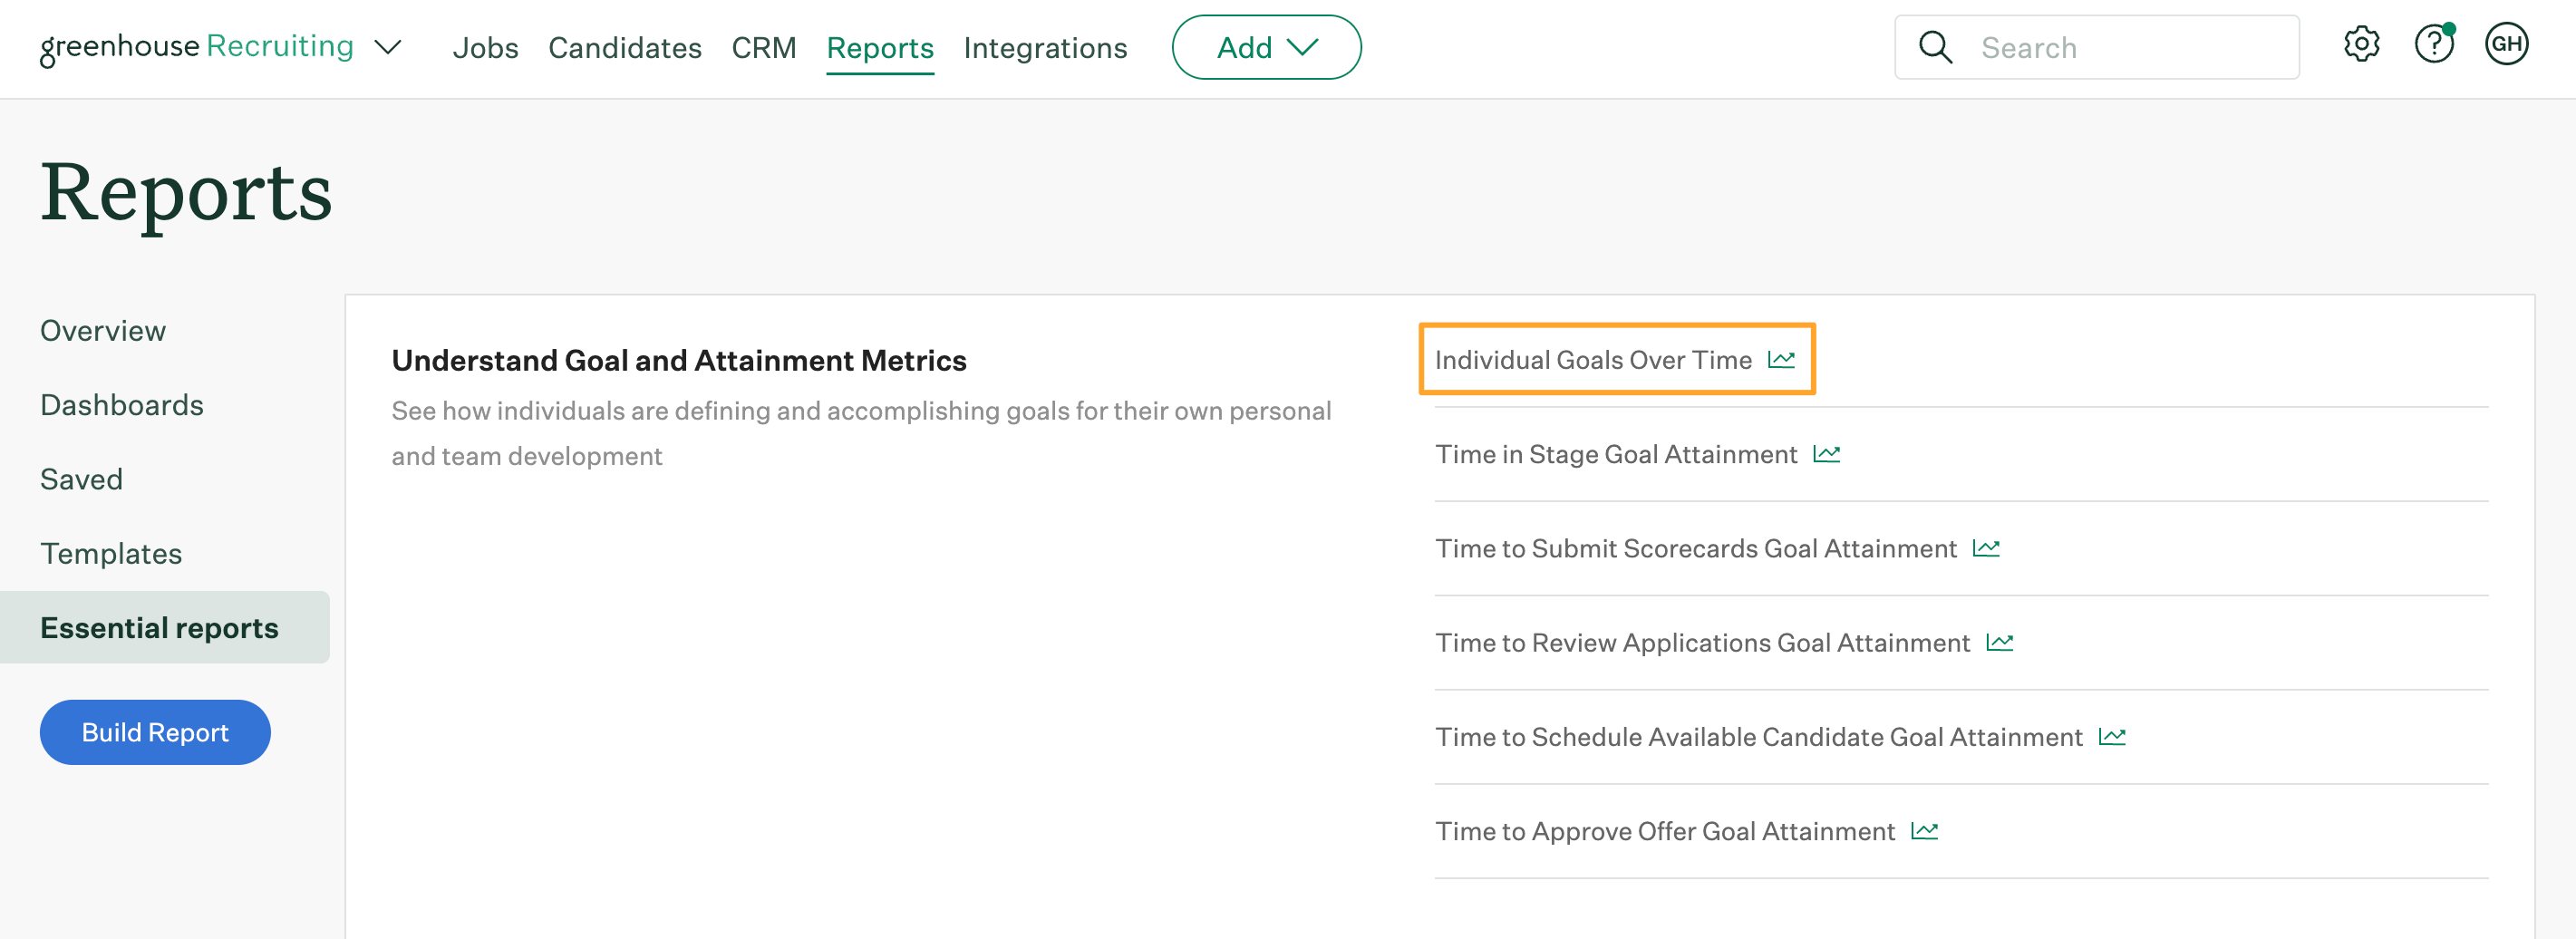 Individual-goals-over-time-report-highlighted-on-the-essential-reports-page.png